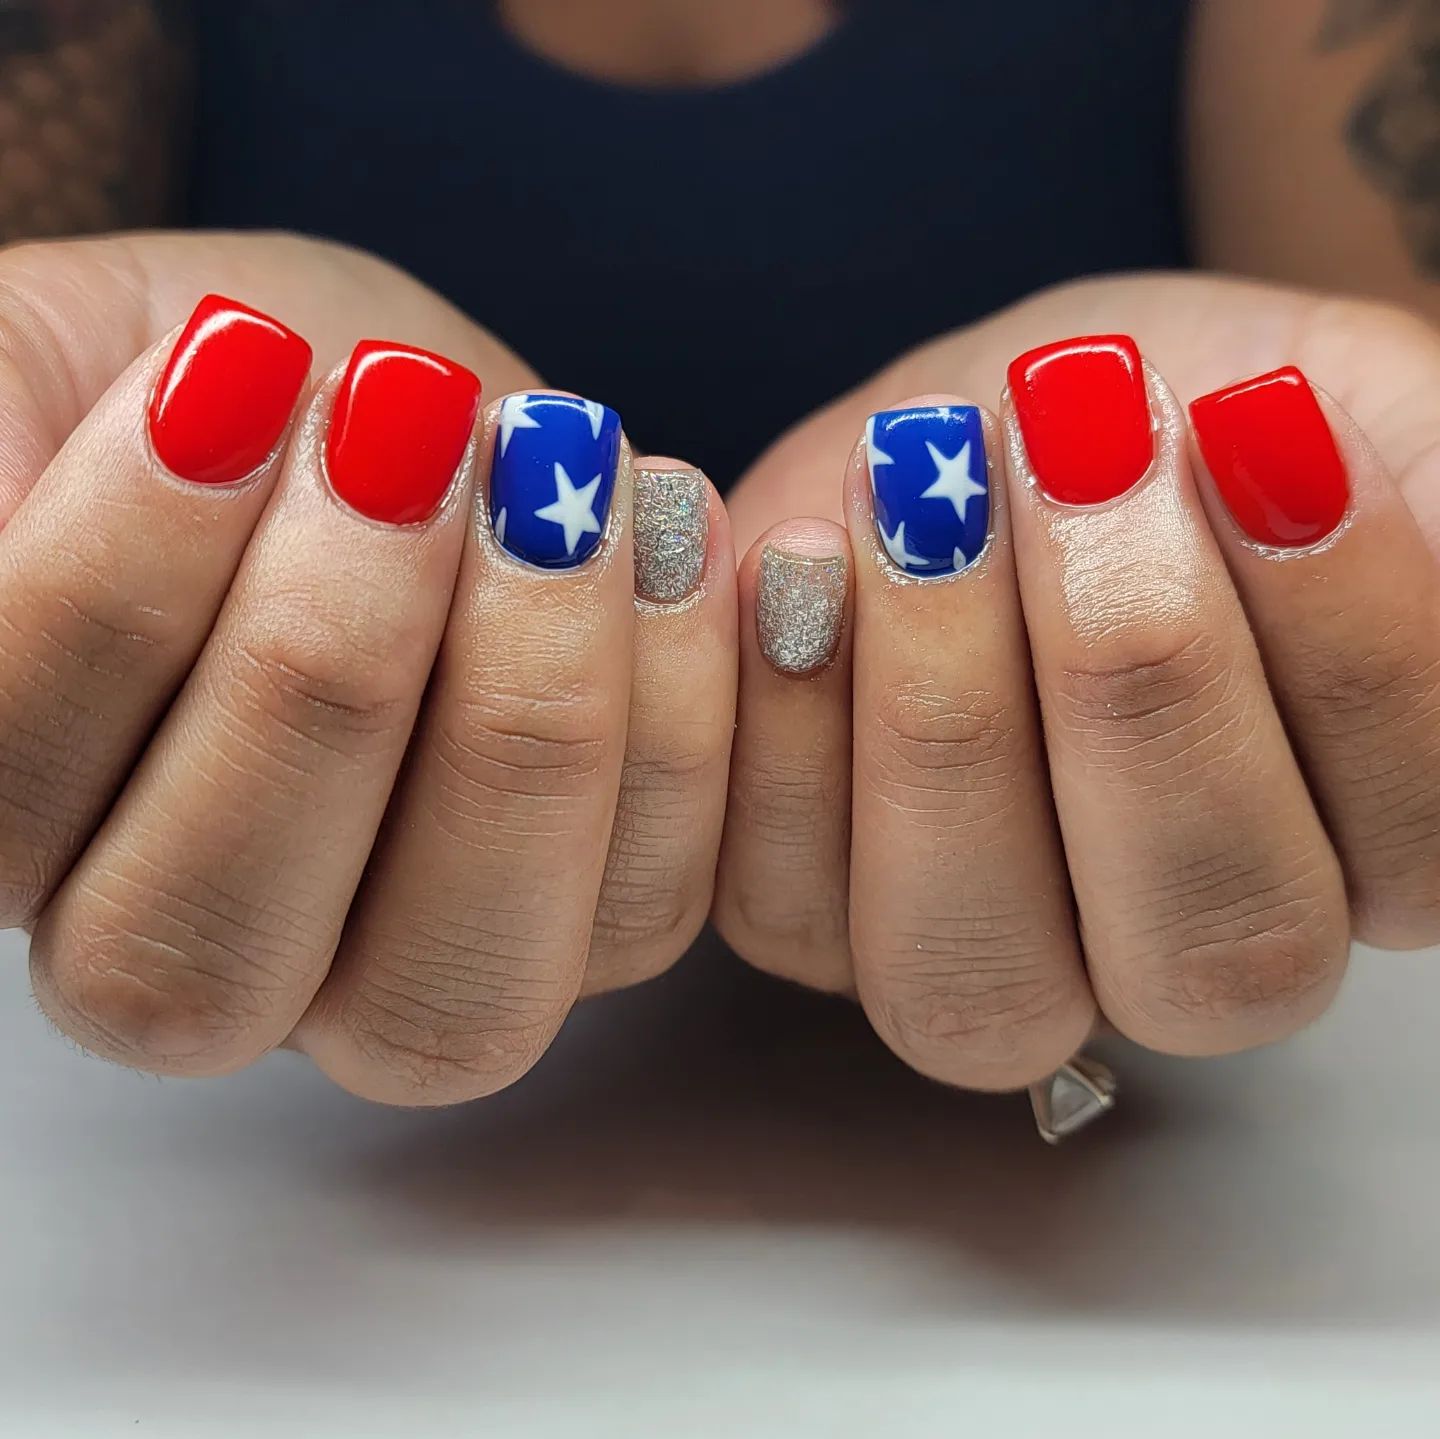 To celebrate the 4th of July, here is a great nail design idea for you. As accent nails, you can have white stars on dark blue base and a glittered silver on your pinky finger.